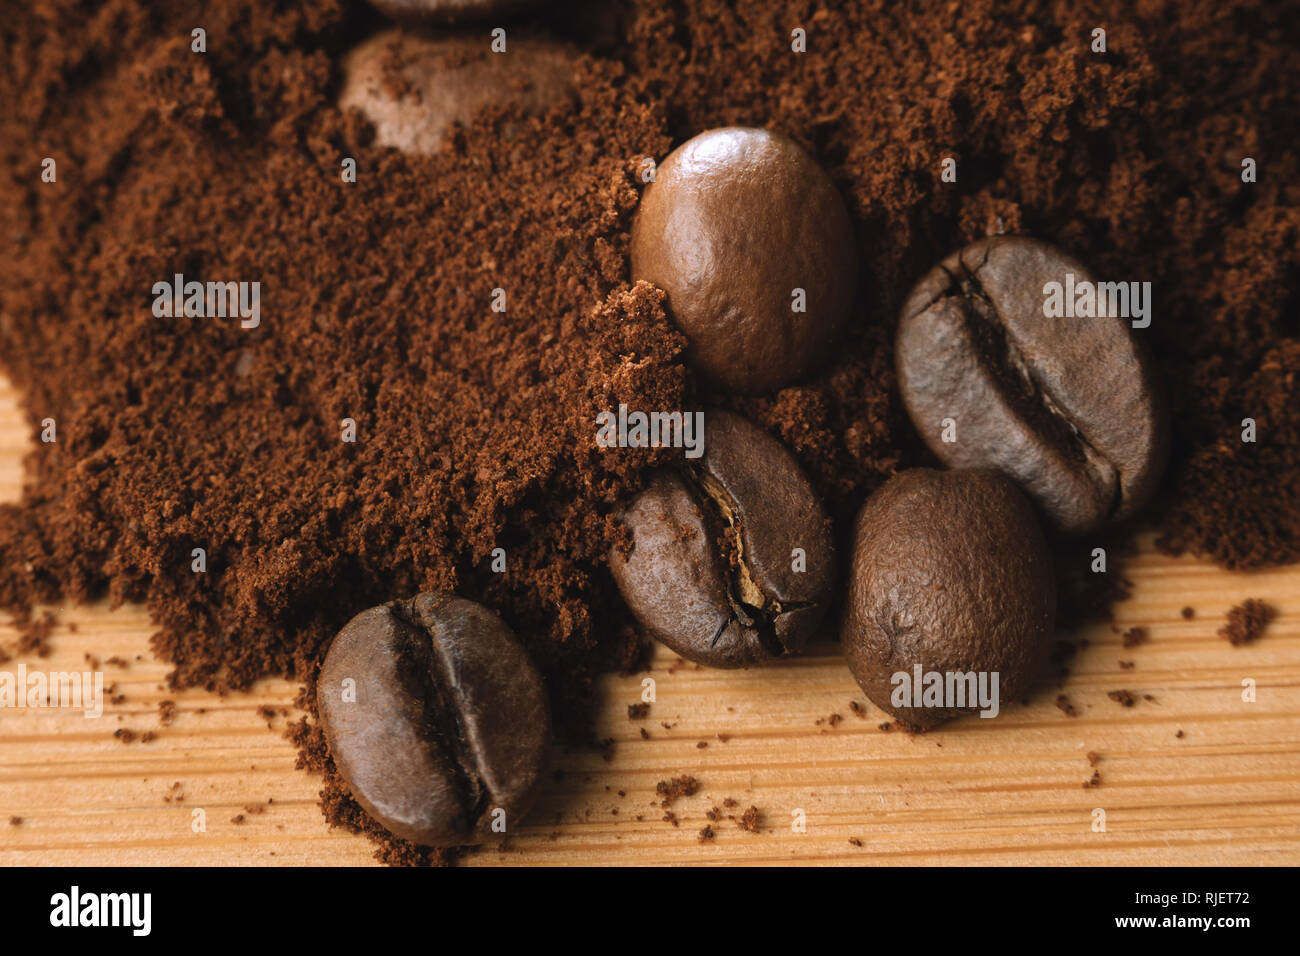 Close up photo of Coffee beans and ground coffee. Stock Photo